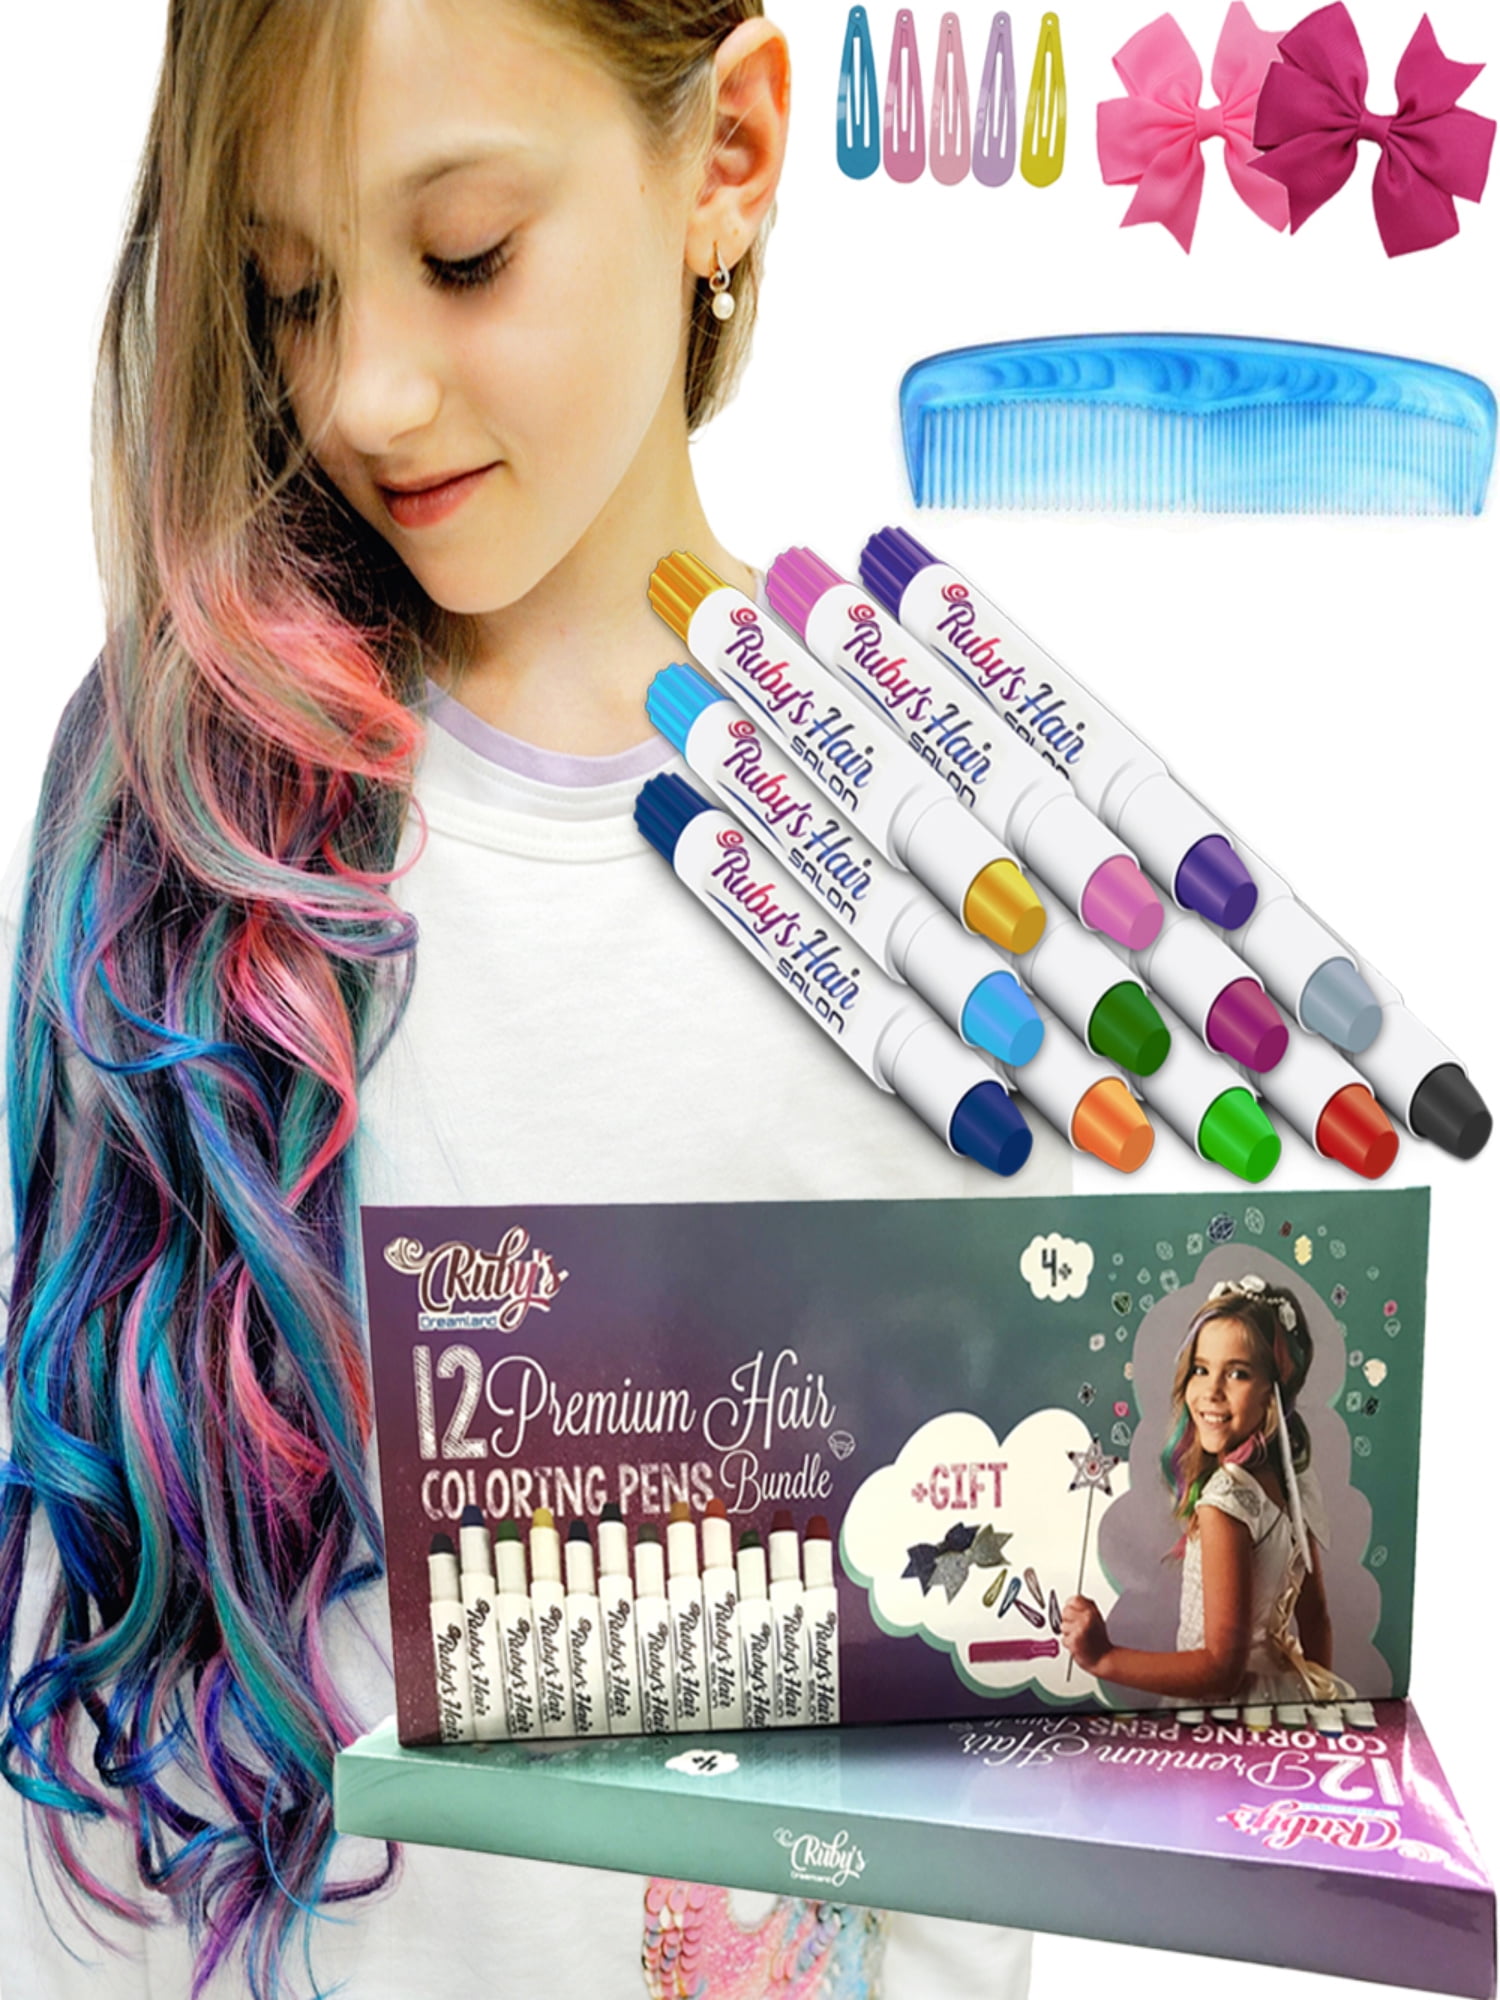 Hair Chalk Salon For Girls ,Kids Temporary Hair Color, Popular Girls Toys  And Gifts Age 4 Year Old and up, Teen Girl Gifts 